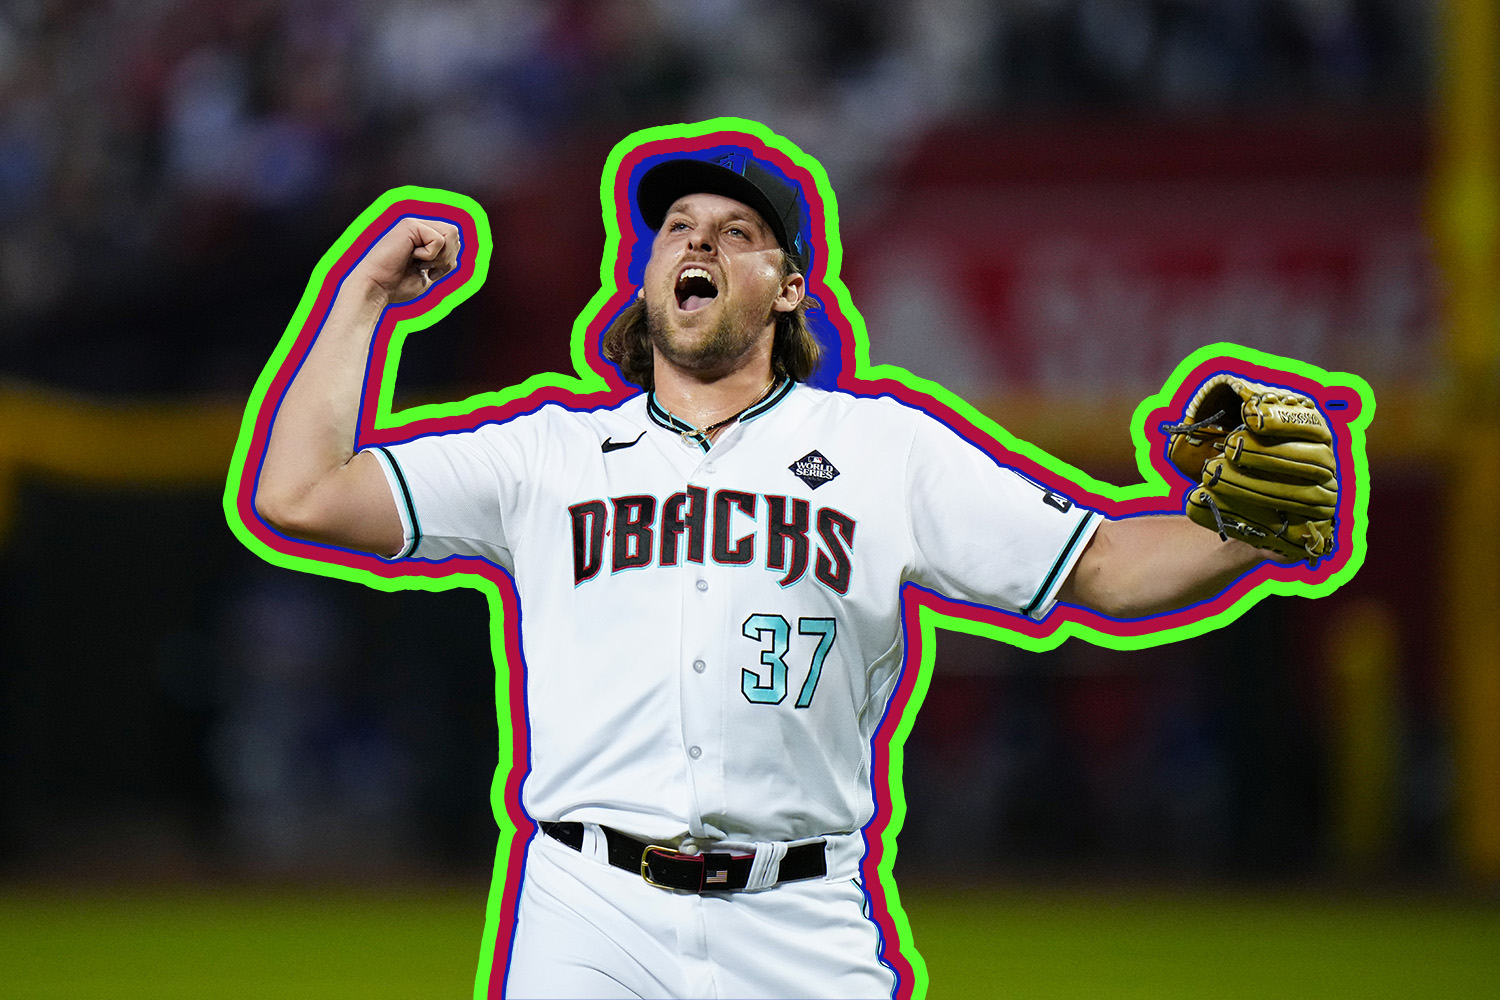 PHOENIX, AZ - NOVEMBER 01: Kevin Ginkel #37 of the Arizona Diamondbacks reacts during Game 5 of the 2023 World Series between the Texas Rangers and the Arizona Diamondbacks at Chase Field on Wednesday, November 1, 2023 in Phoenix, Arizona. Edits by Defector; The Gink is surrounded by various colors.